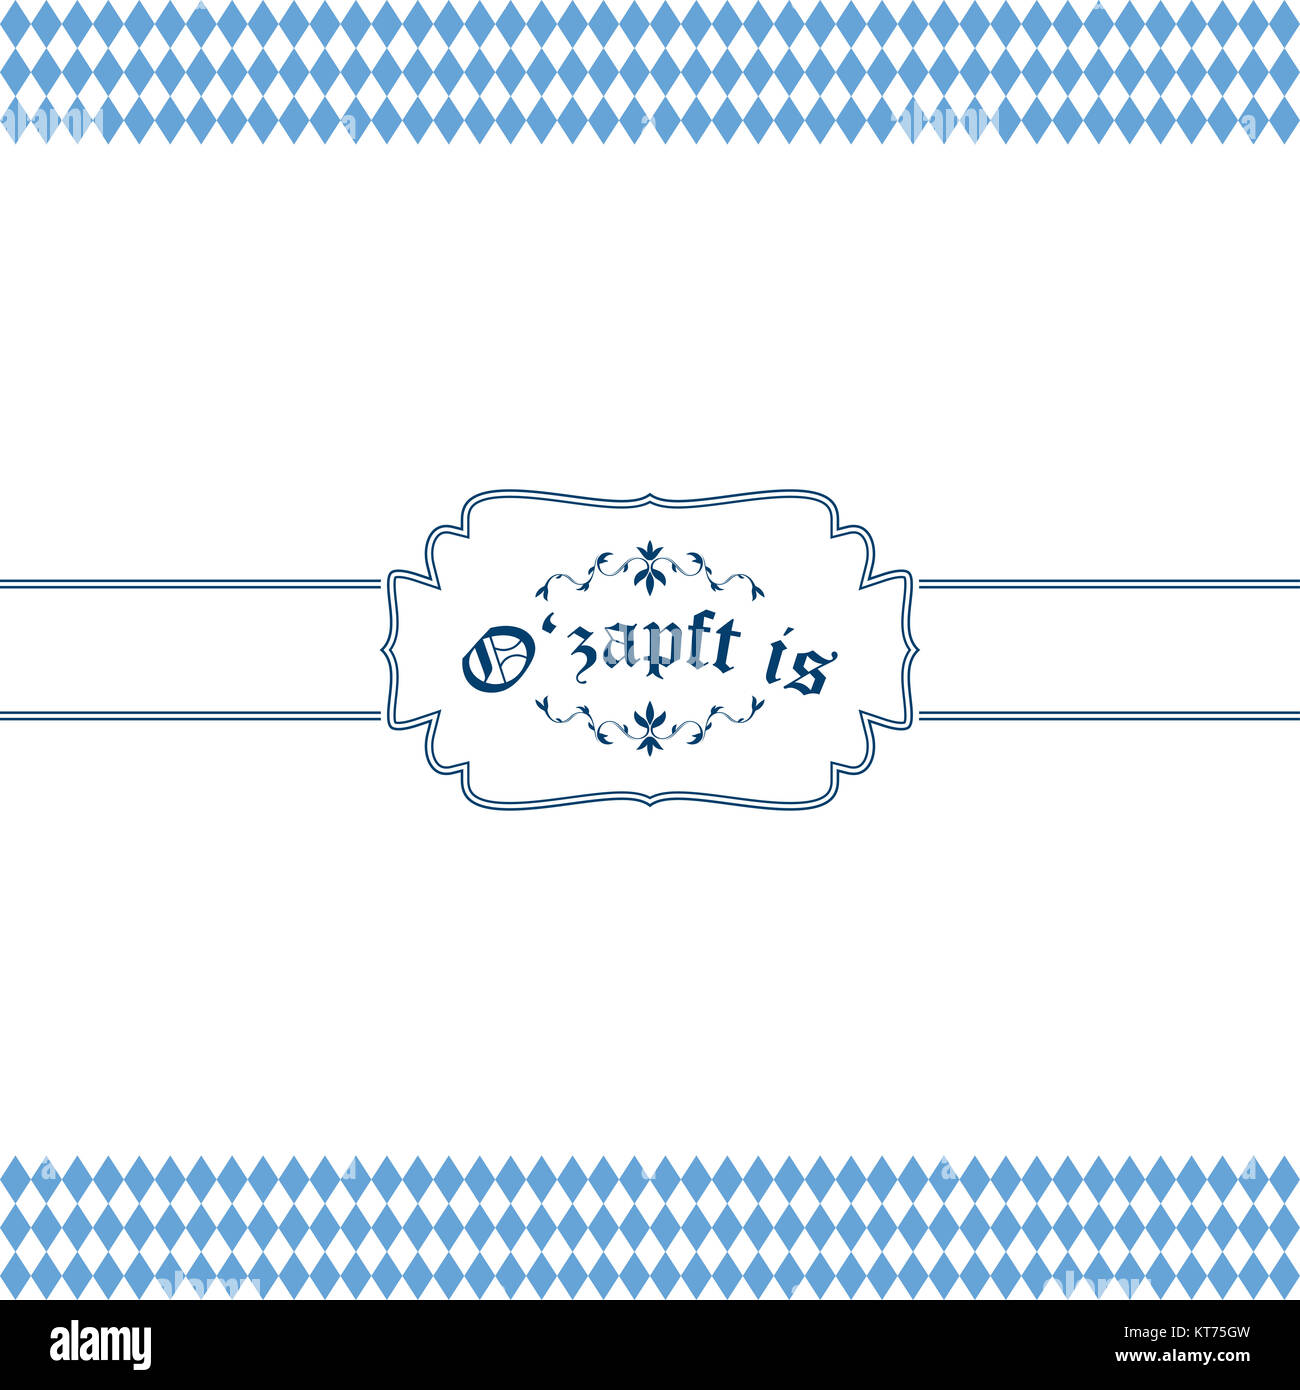 blue and white Oktoberfest banner with text O'zapft is Stock Photo